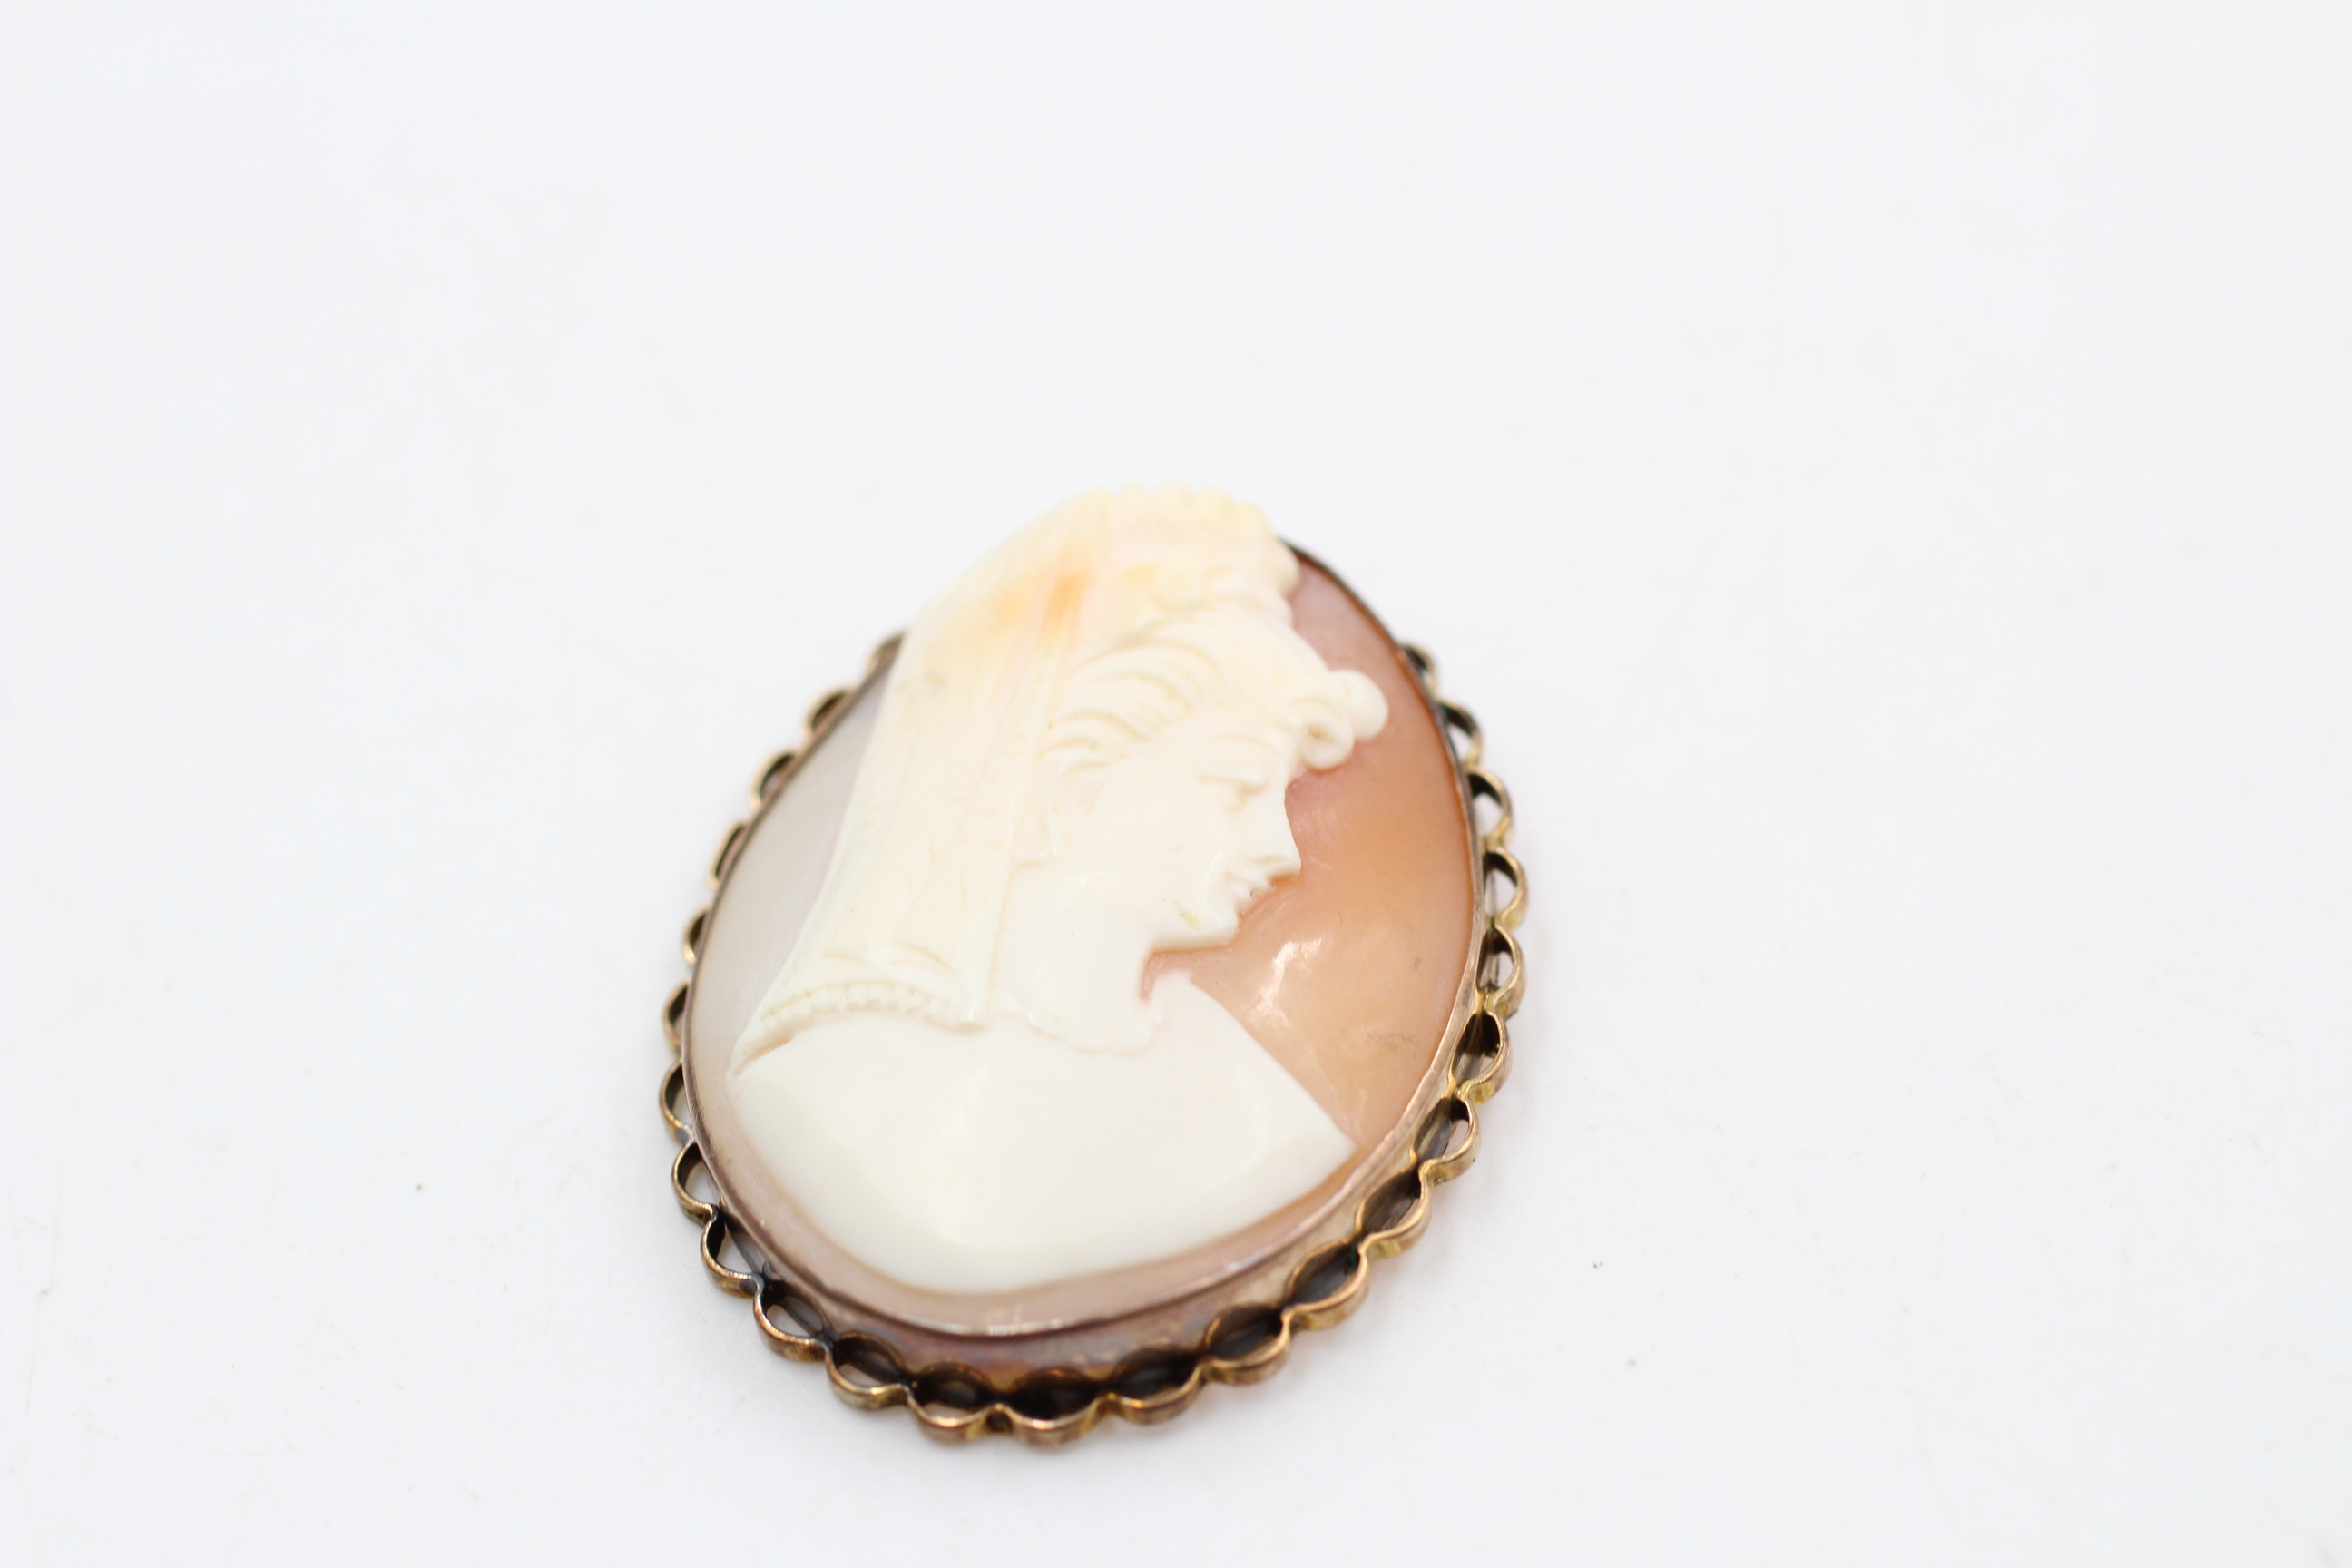 9ct gold vintage cameo pendant (8.1g)